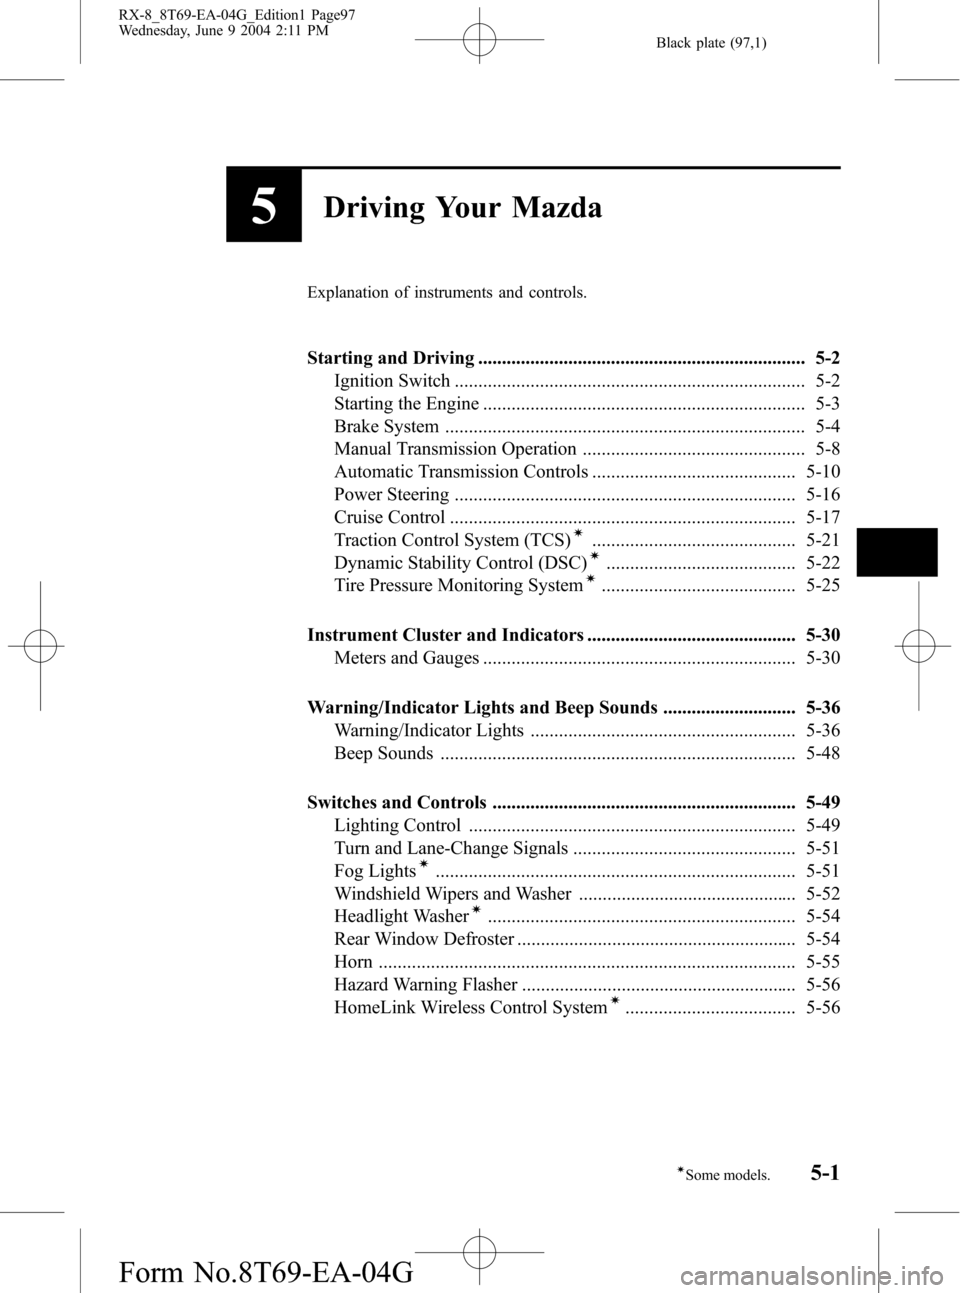 MAZDA MODEL RX 8 2005  Owners Manual (in English) Black plate (97,1)
5Driving Your Mazda
Explanation of instruments and controls.
Starting and Driving ..................................................................... 5-2
Ignition Switch .........